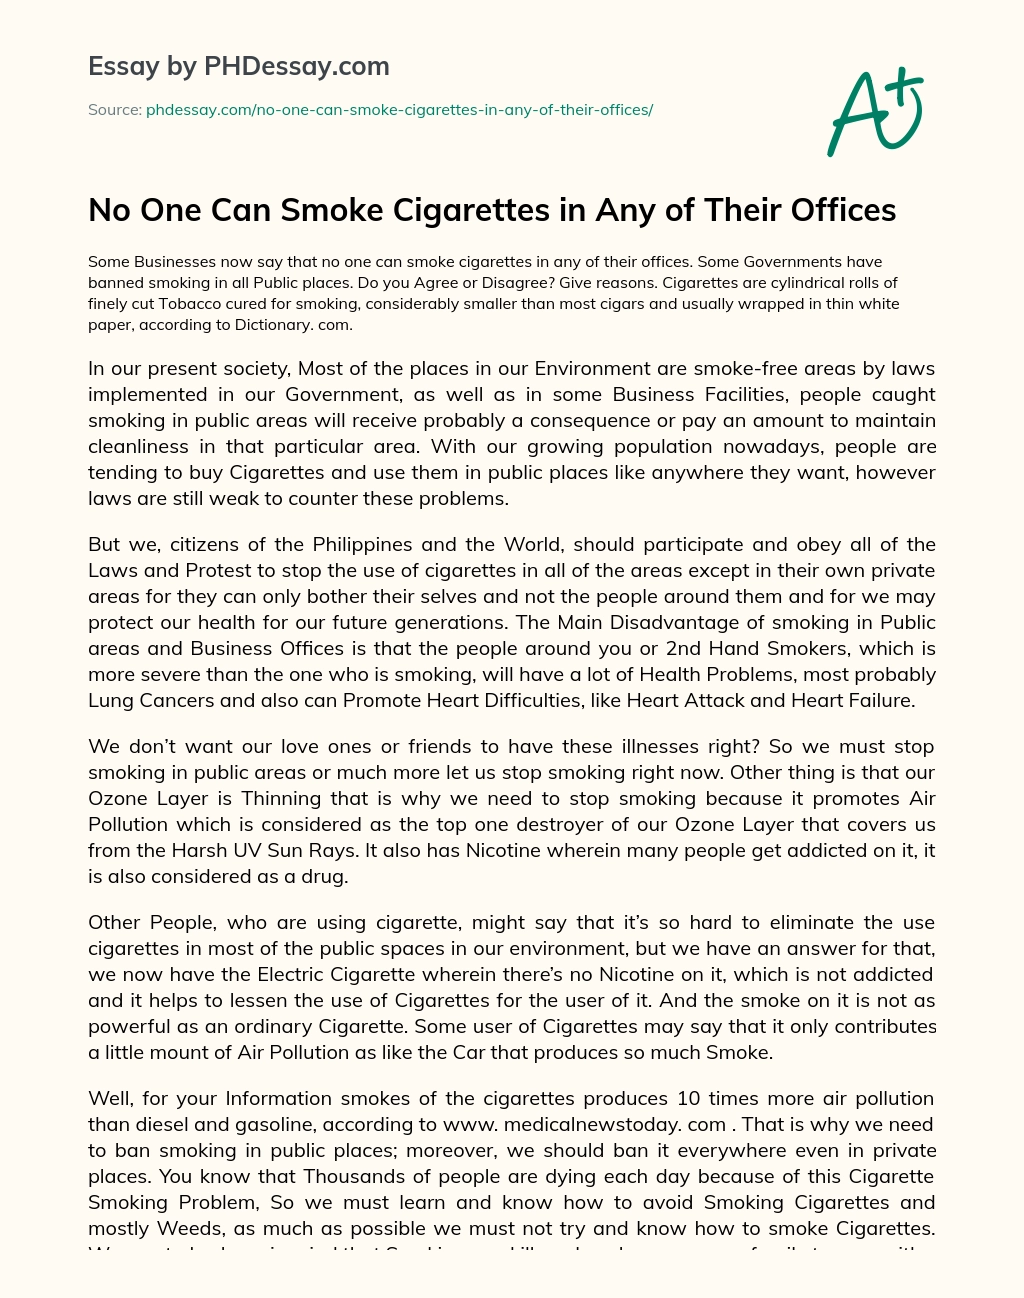 No One Can Smoke Cigarettes in Any of Their Offices essay